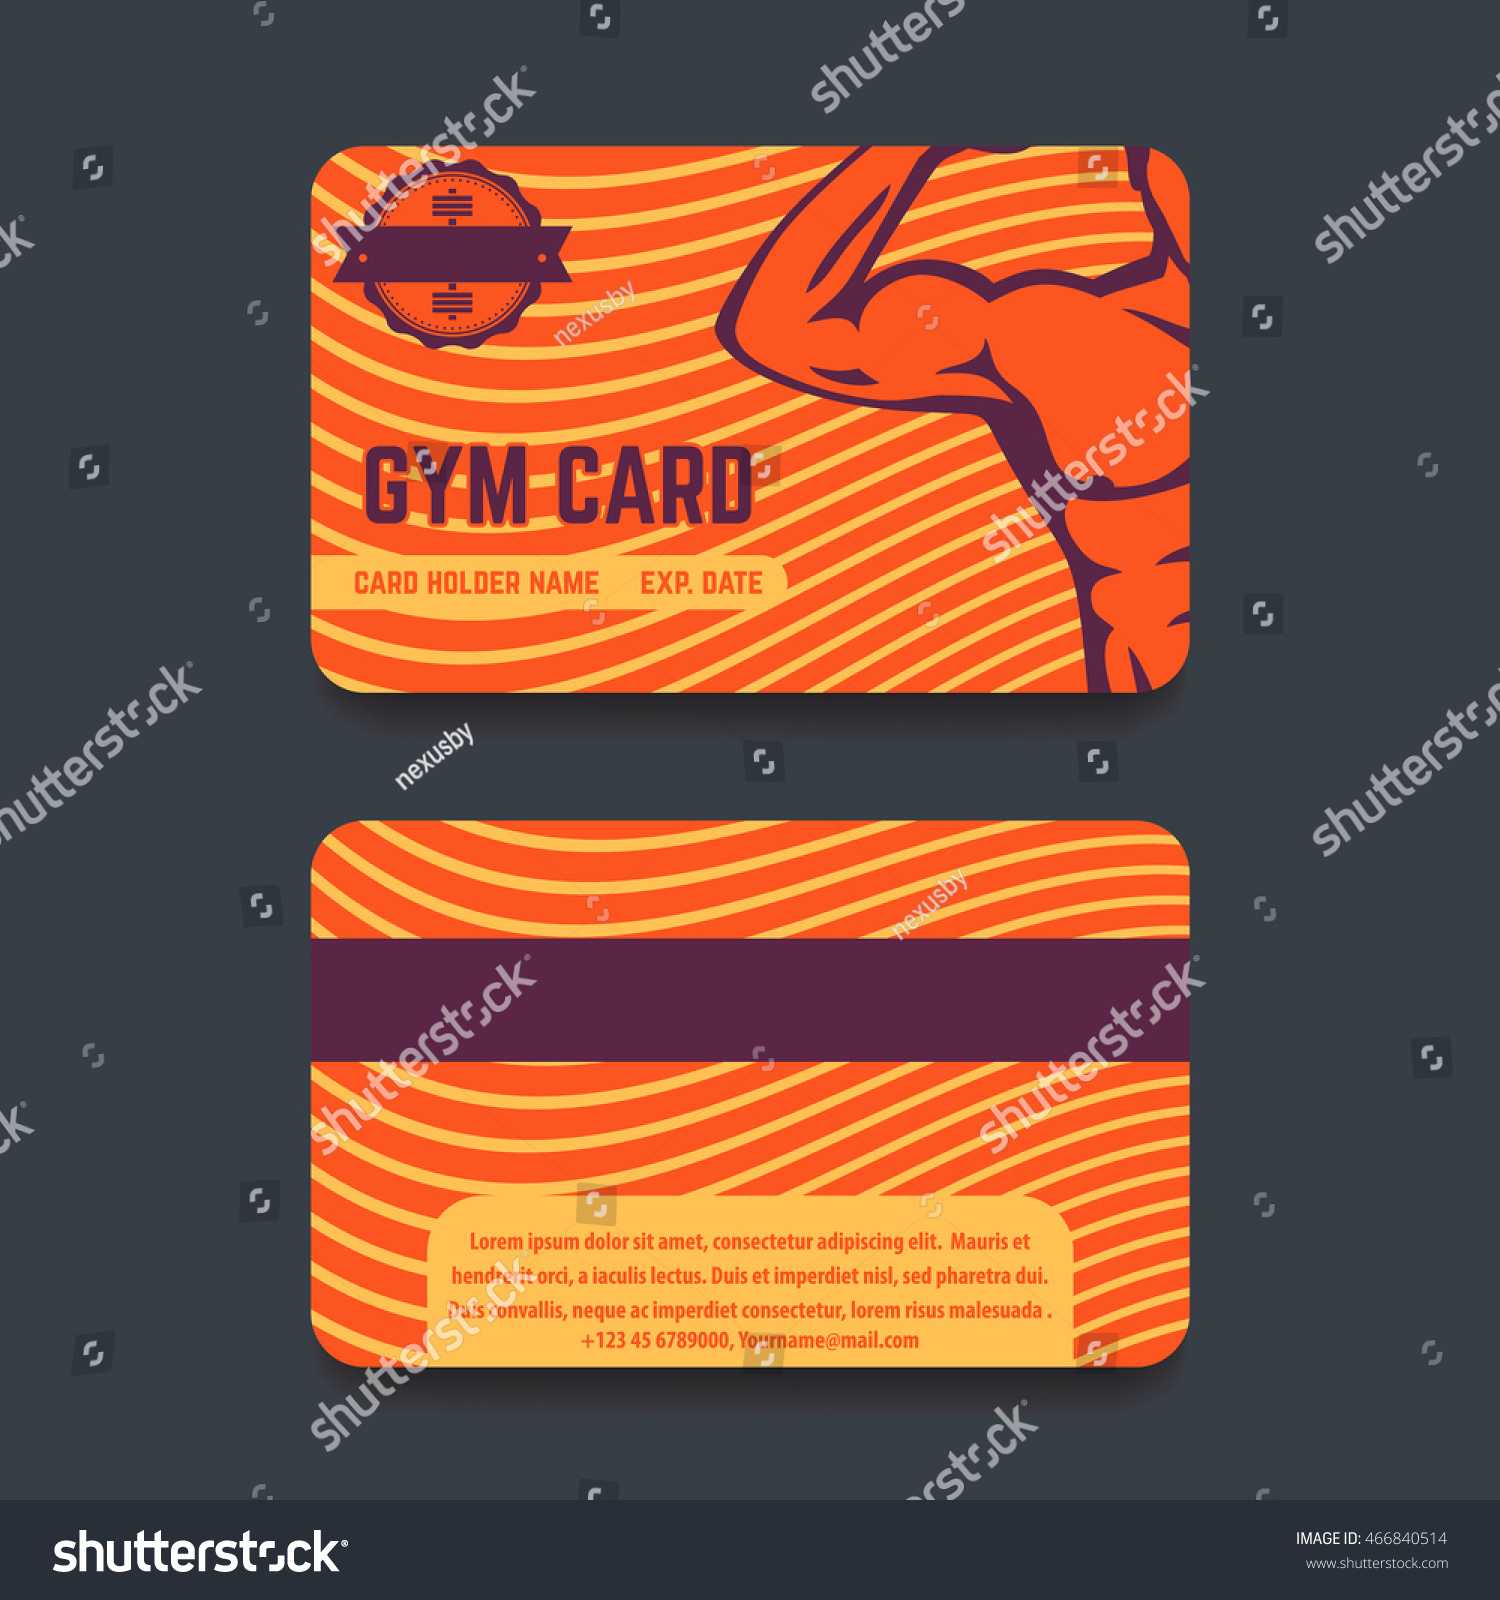 Fitness Club Gym Card Template Design | Miscellaneous Throughout Gym Membership Card Template